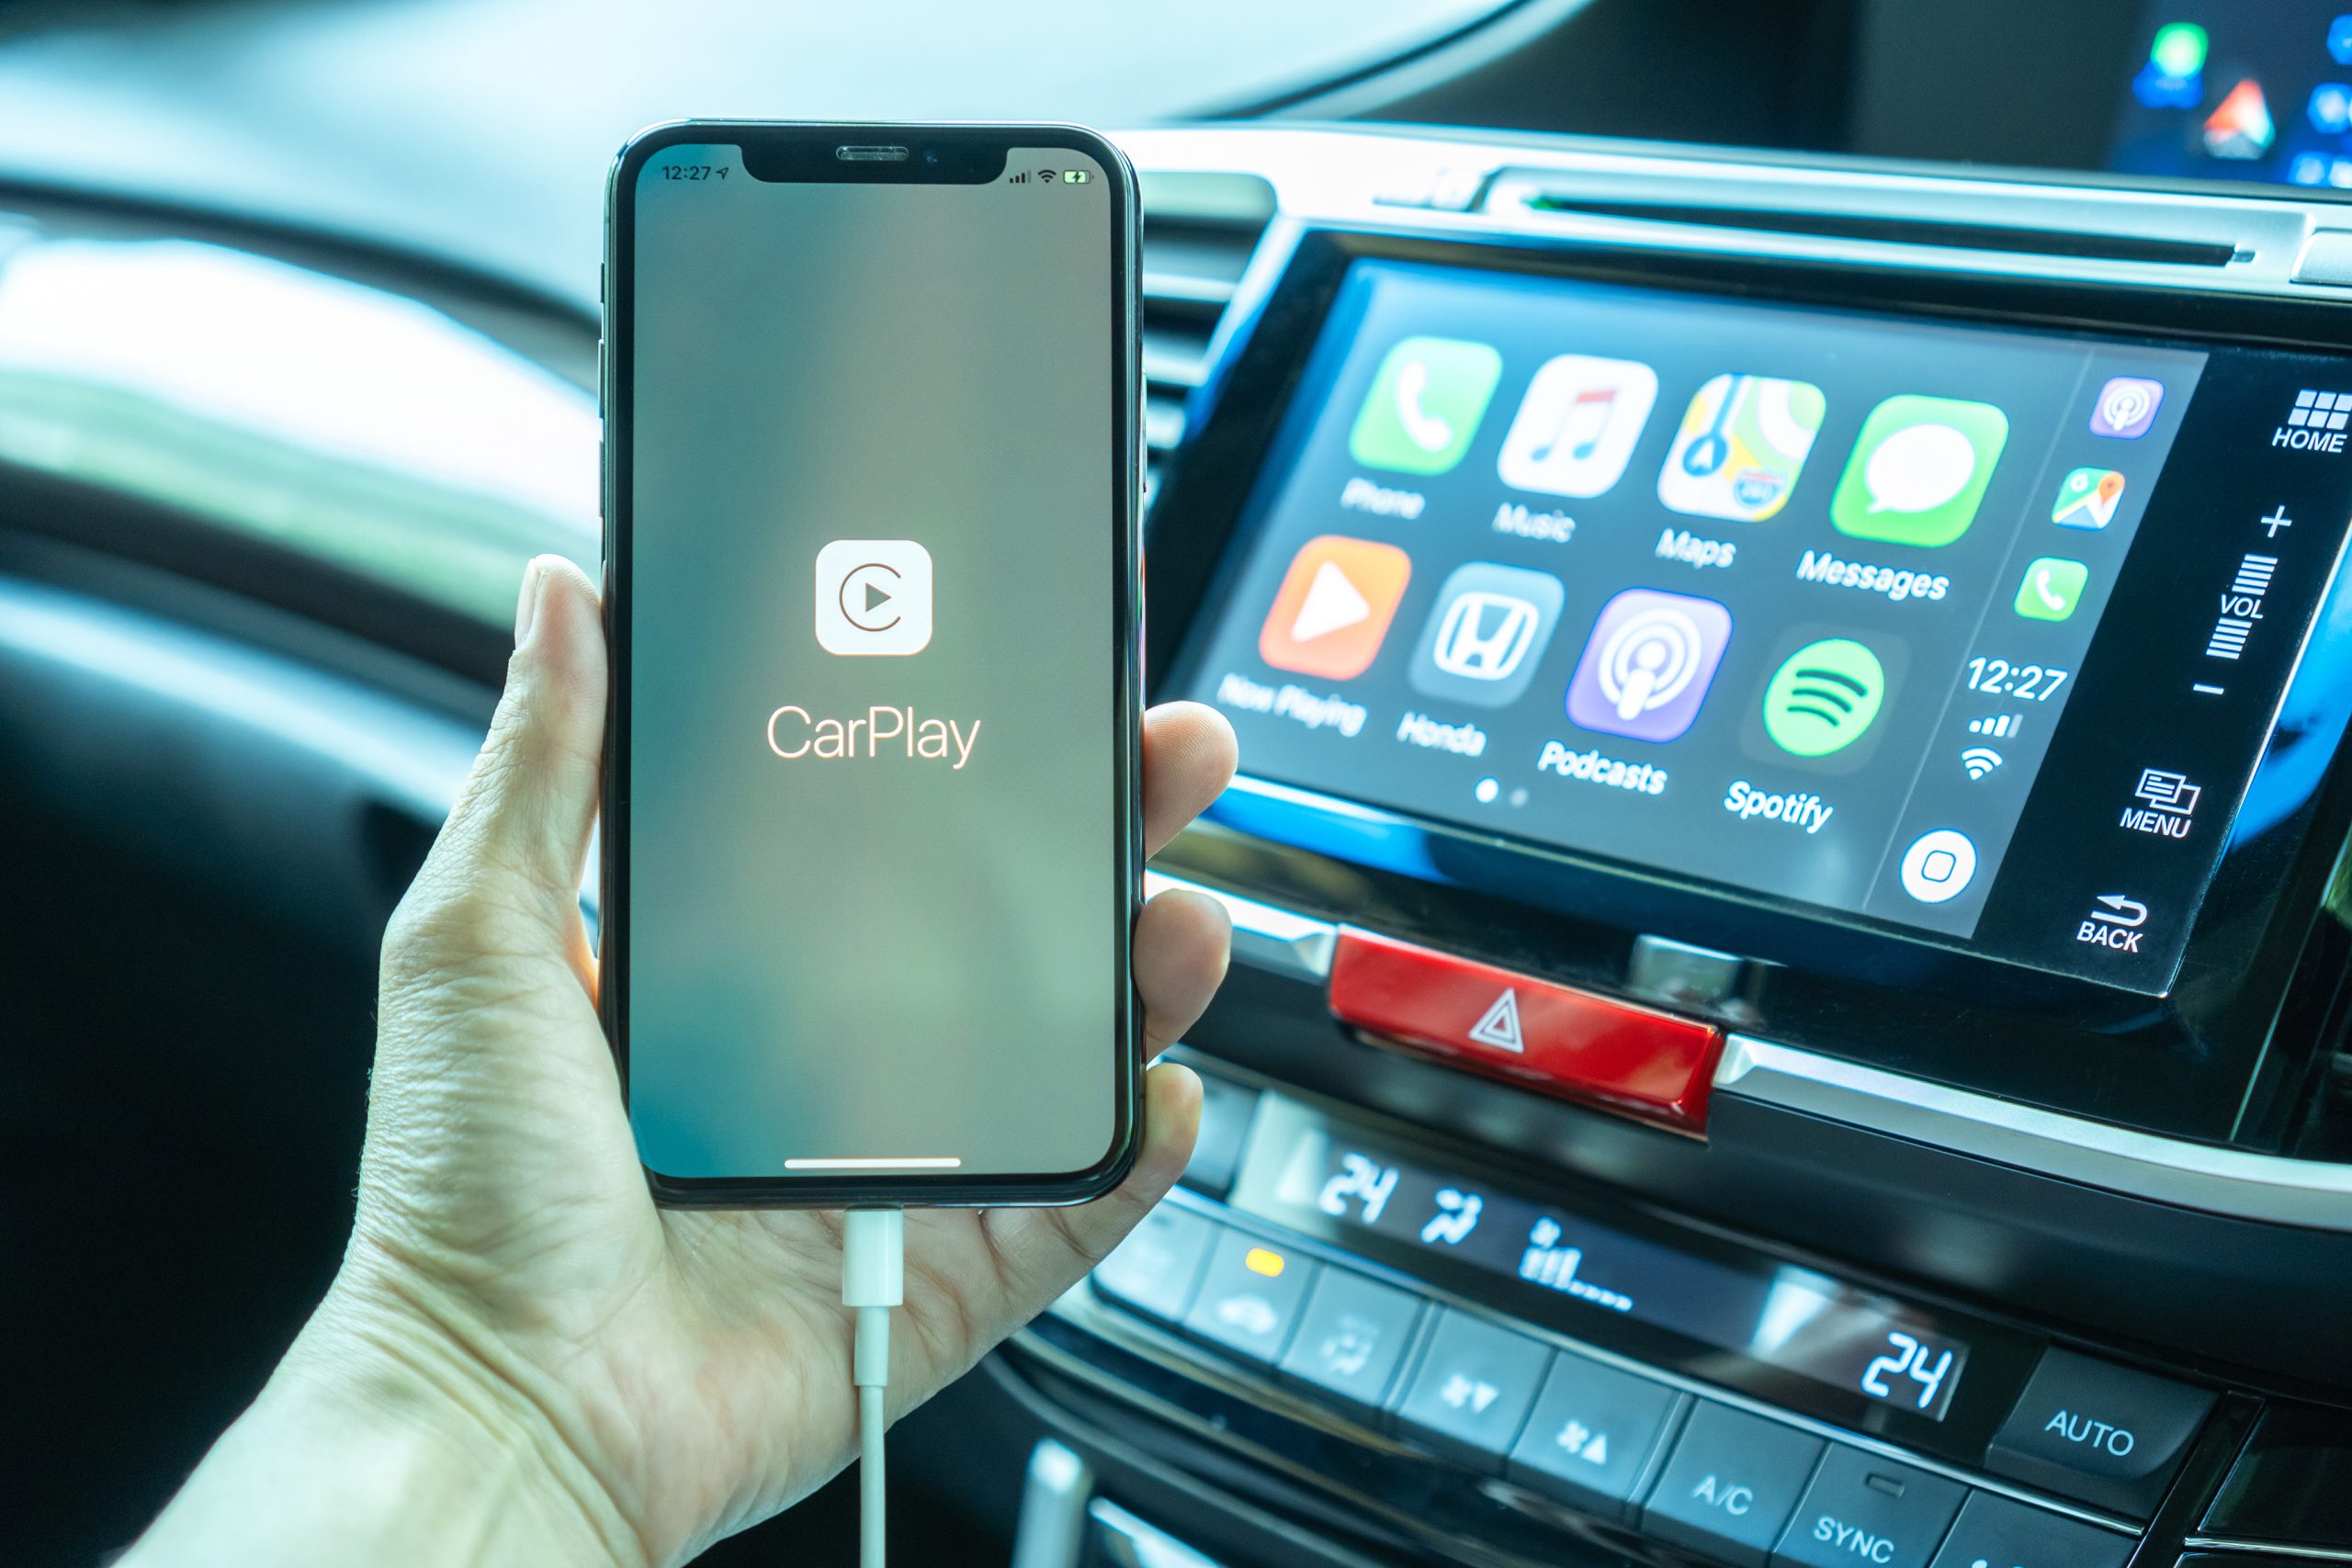 Android Auto vs. Apple CarPlay: What's the Difference?